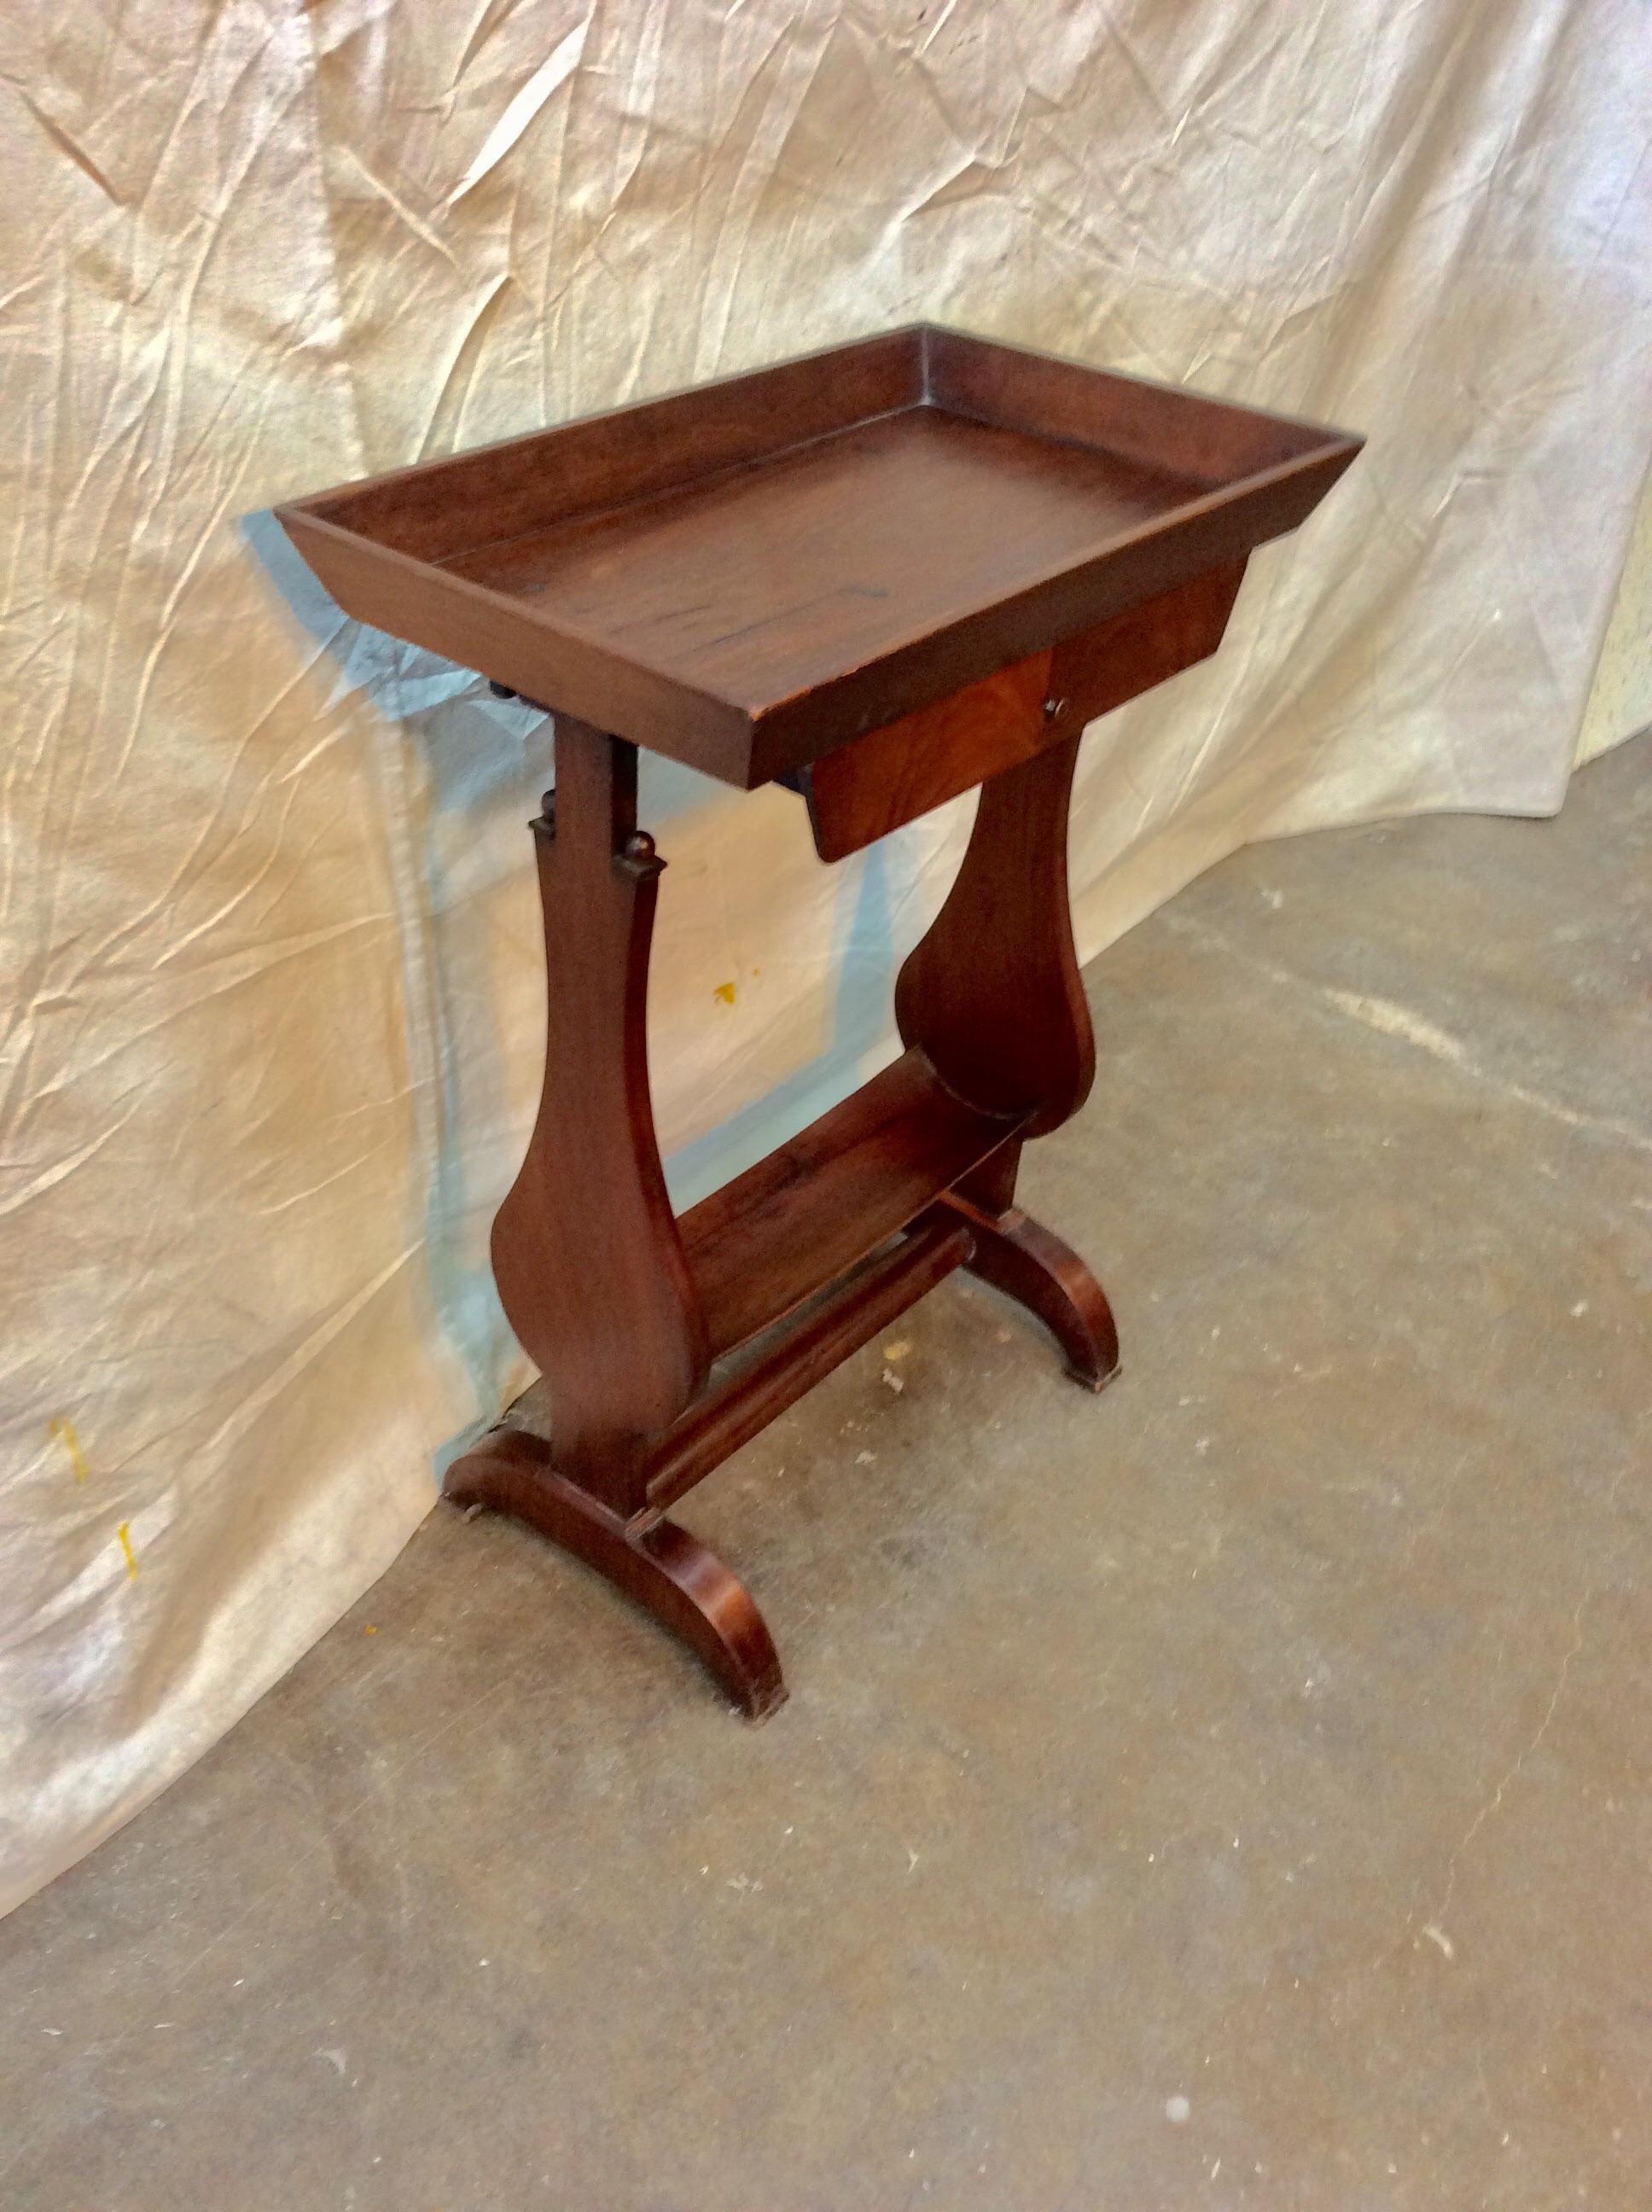 Found in the South of France, this petite Early 20th century French Walnut Side Table is crafted with a raised edge top, one drawer adorned with a brass pull and a storage space on the bottom, possibly for a book or magazine. The two shapely carved